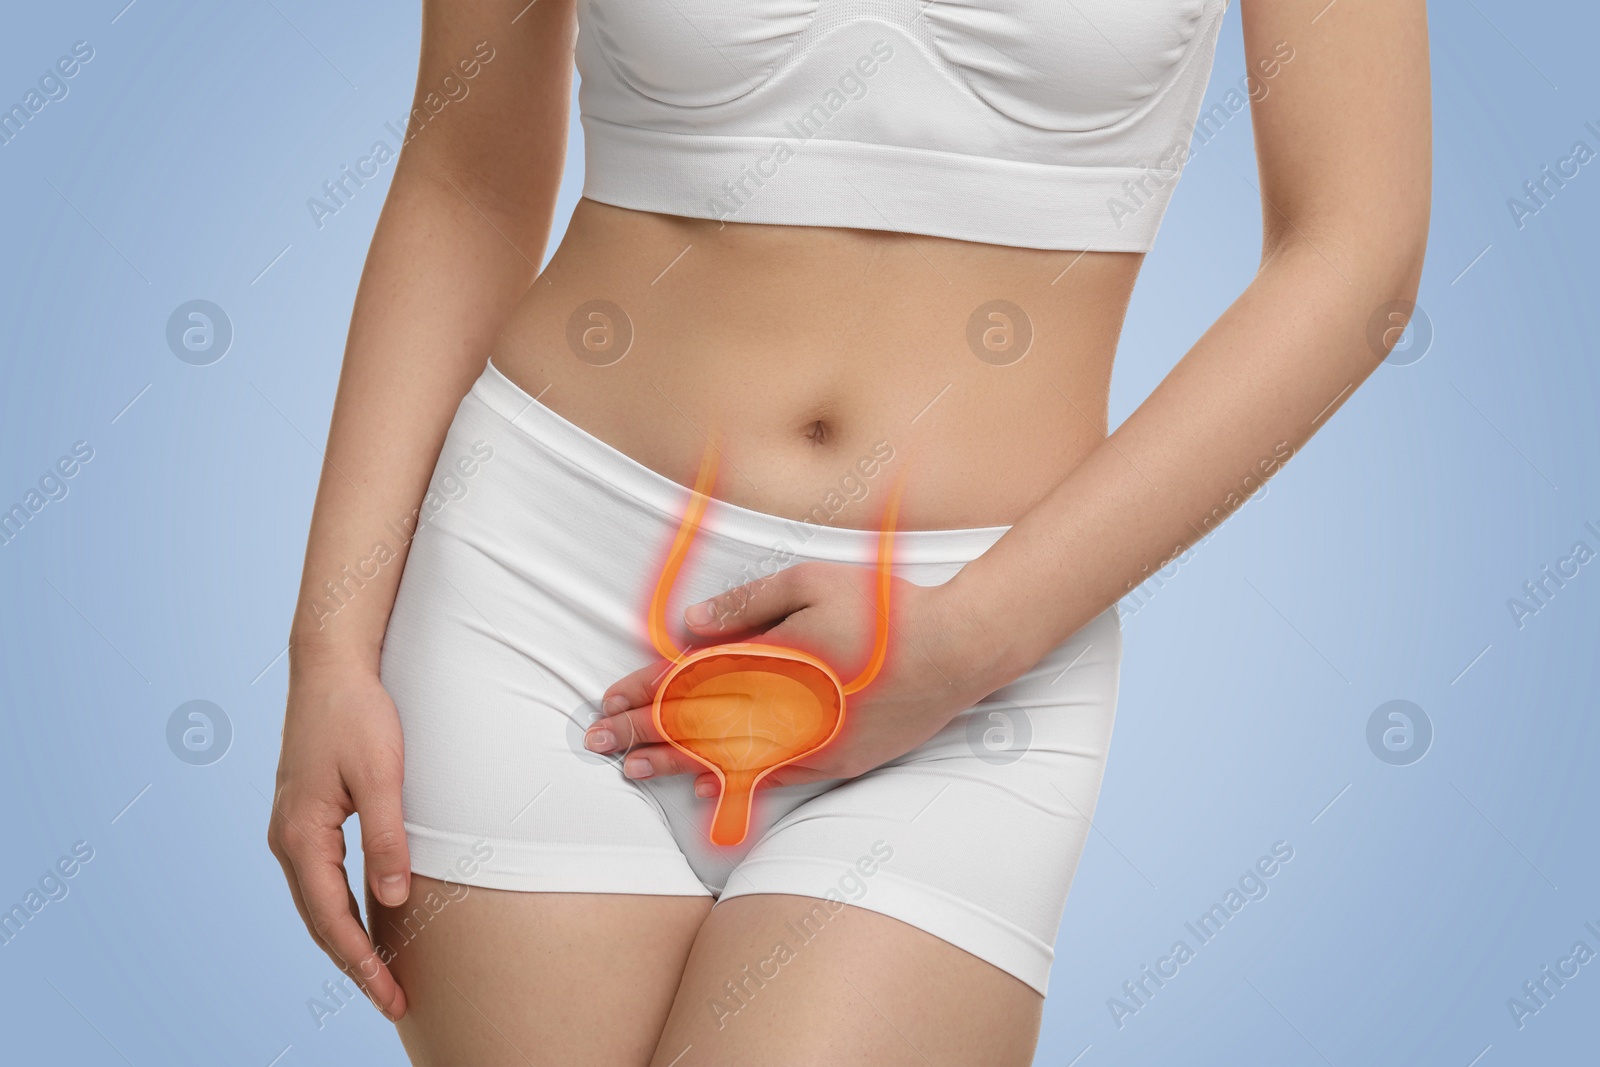 Image of Woman suffering from cystitis on light blue background, closeup. Illustration of urinary system